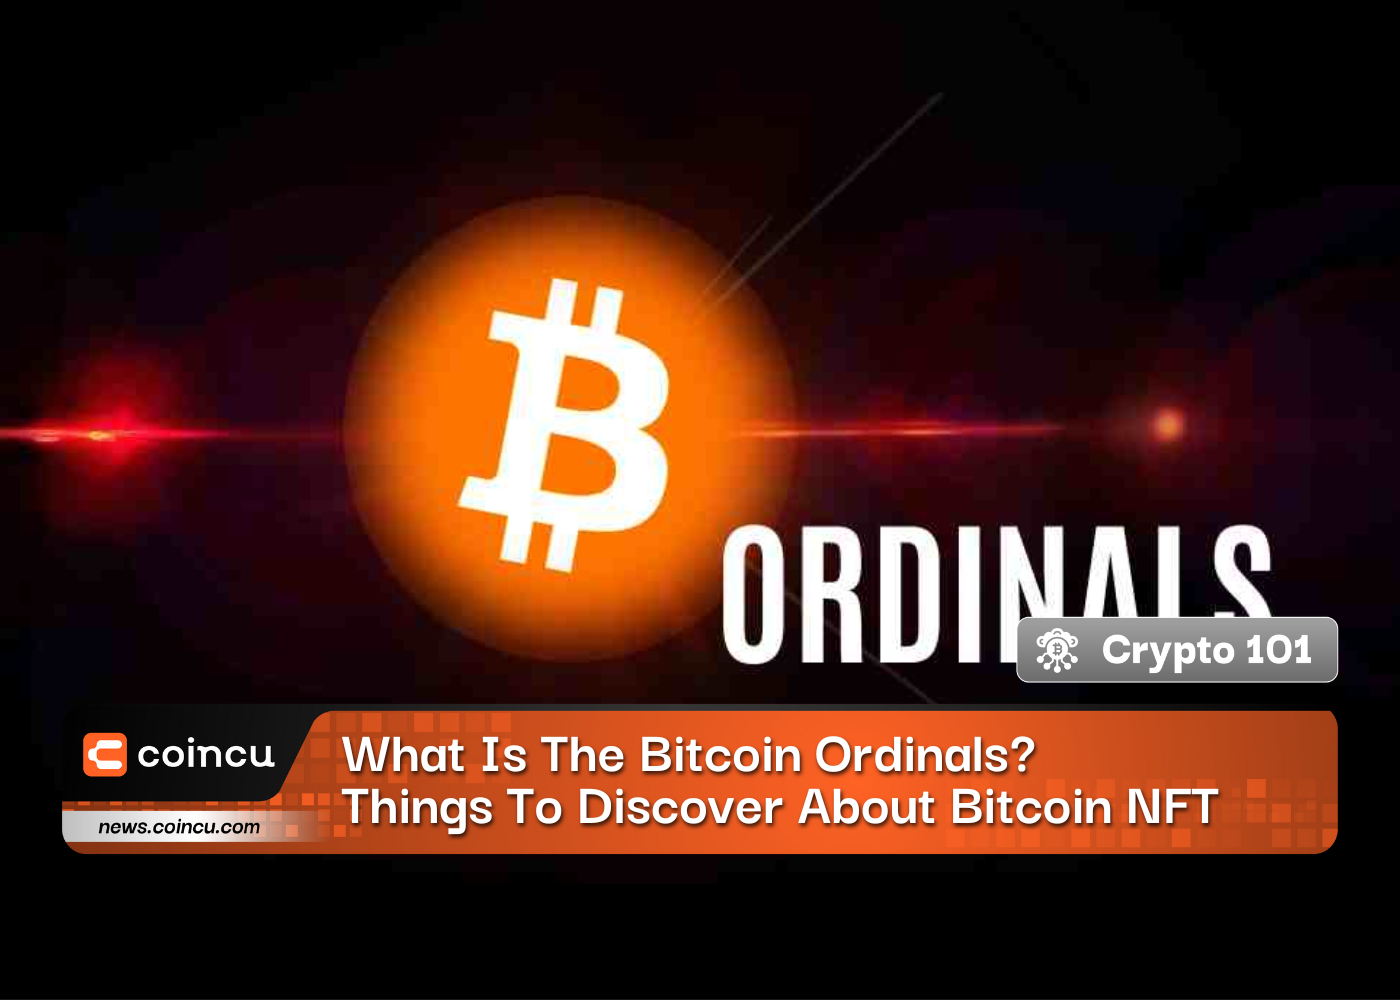 What Is The Bitcoin Ordinals? Things To Discover About Bitcoin NFT